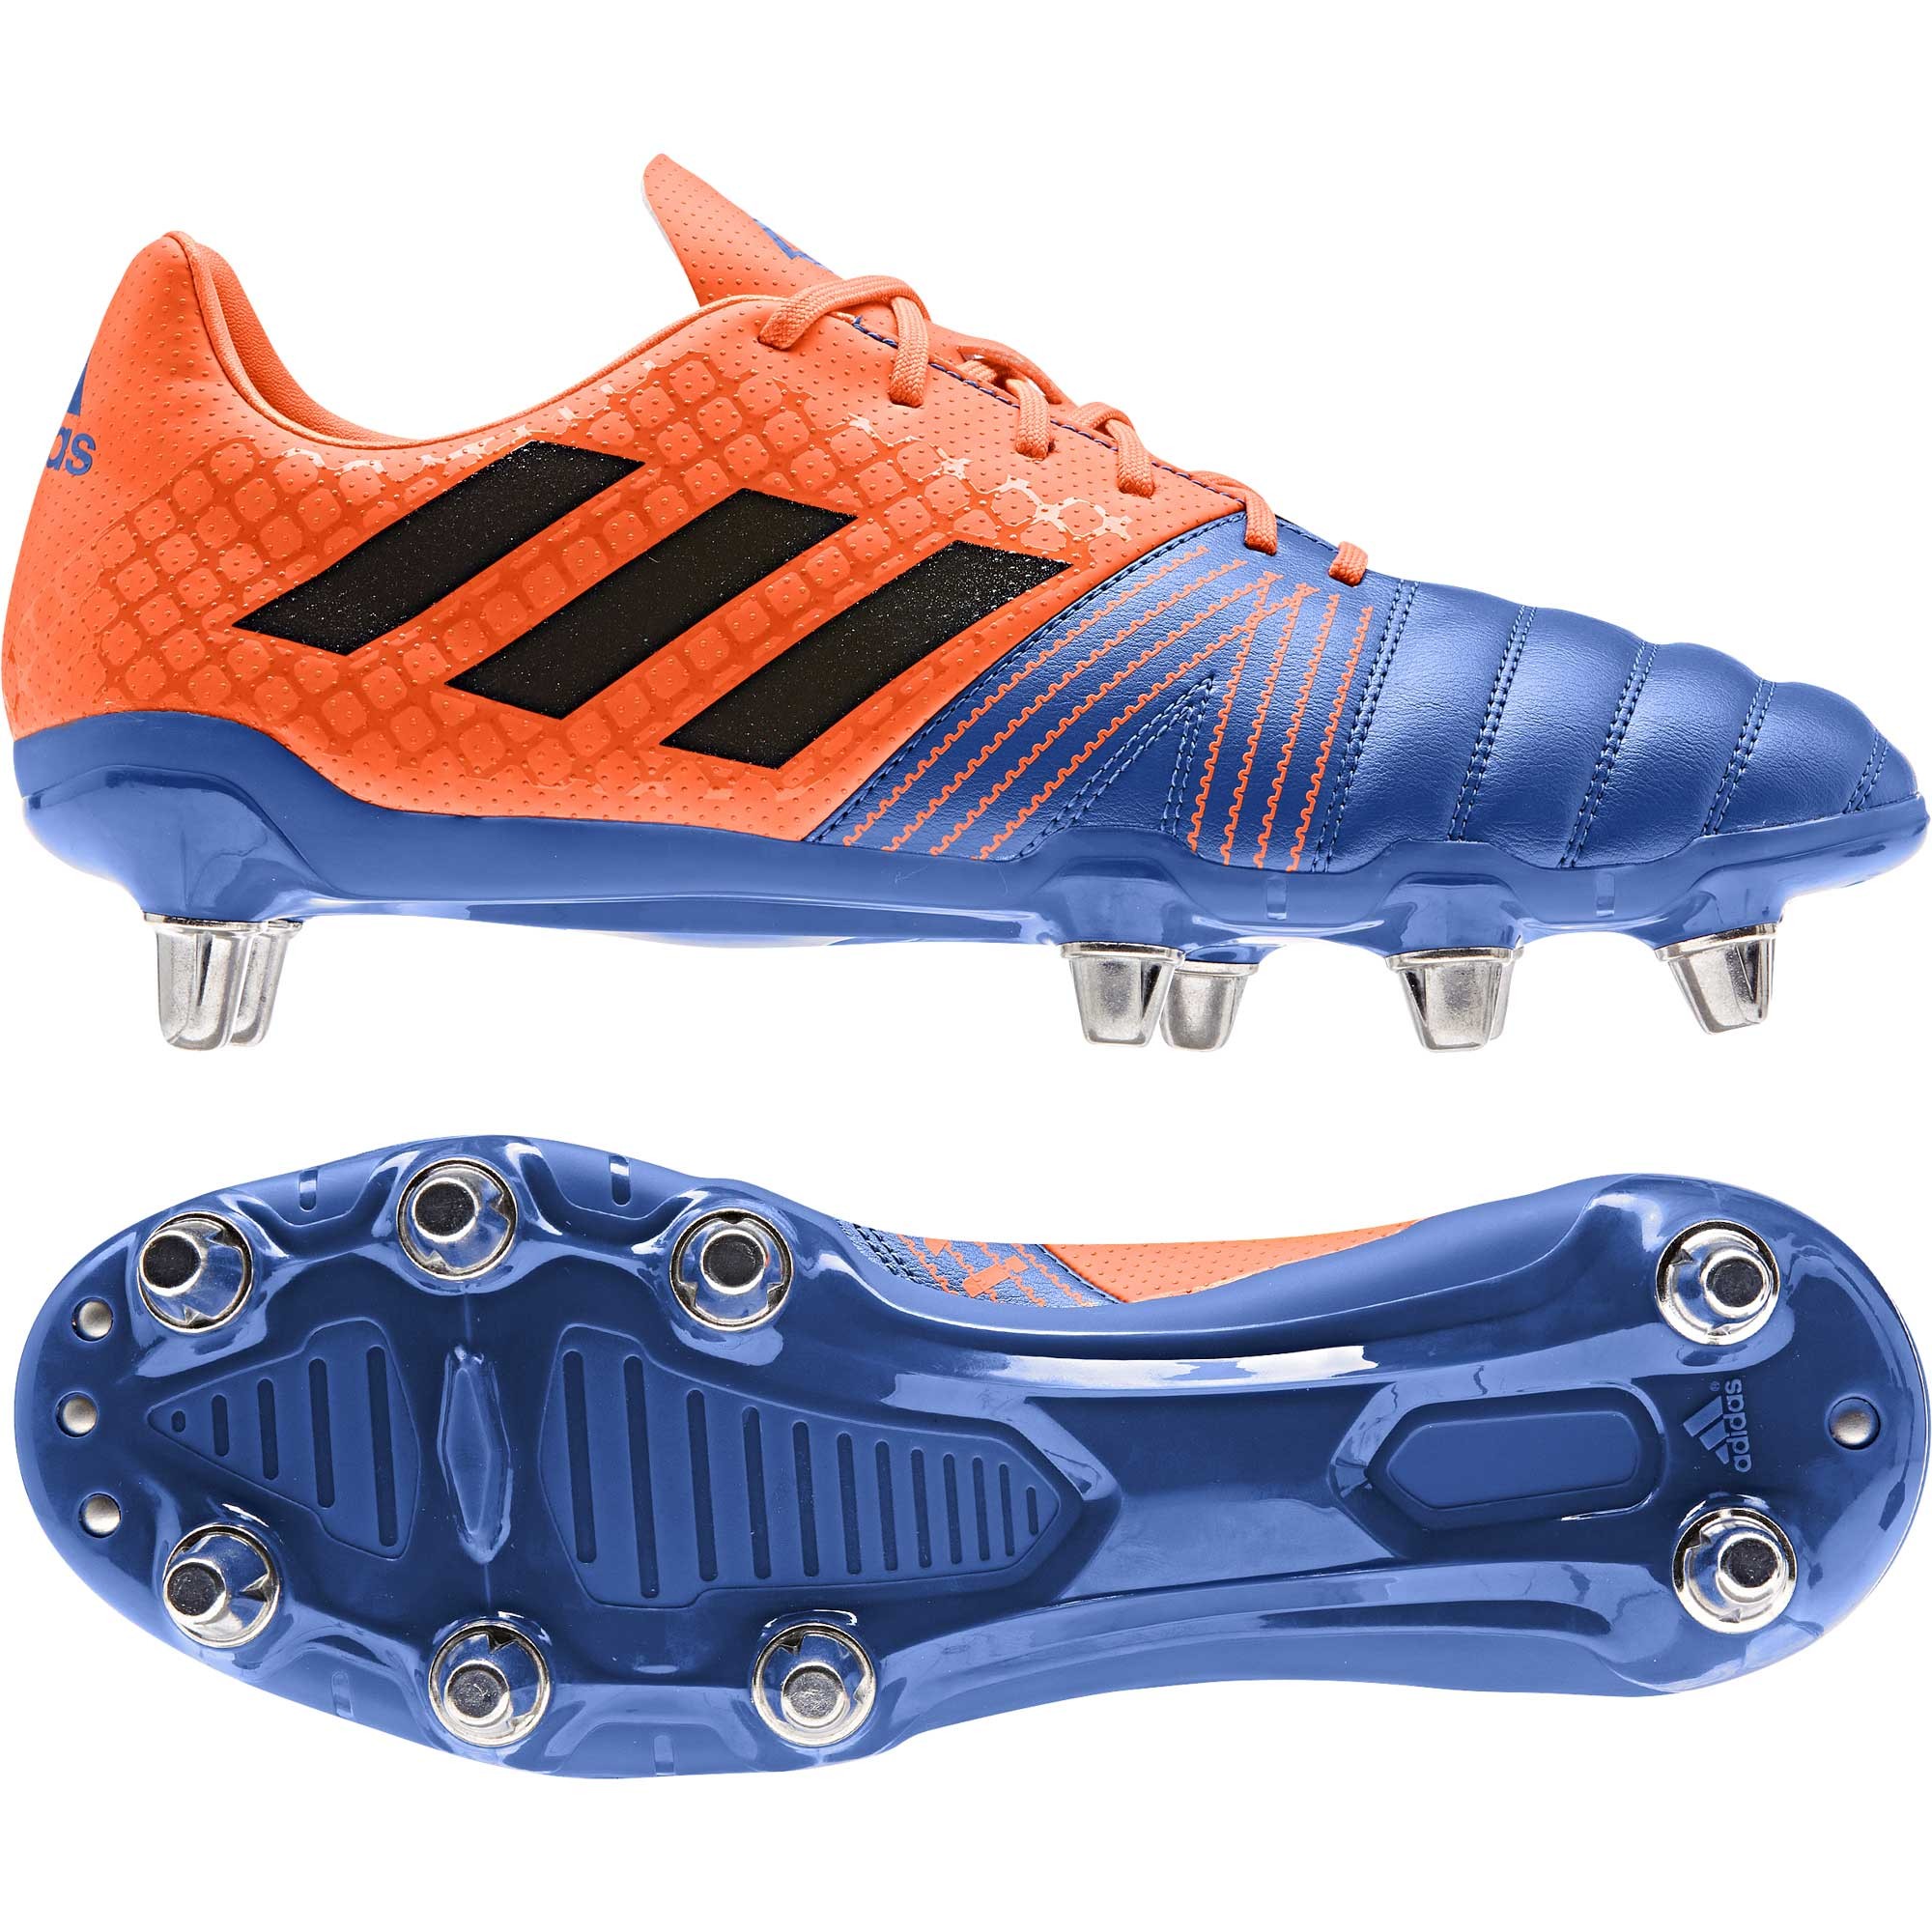 chaussure de rugby adidas